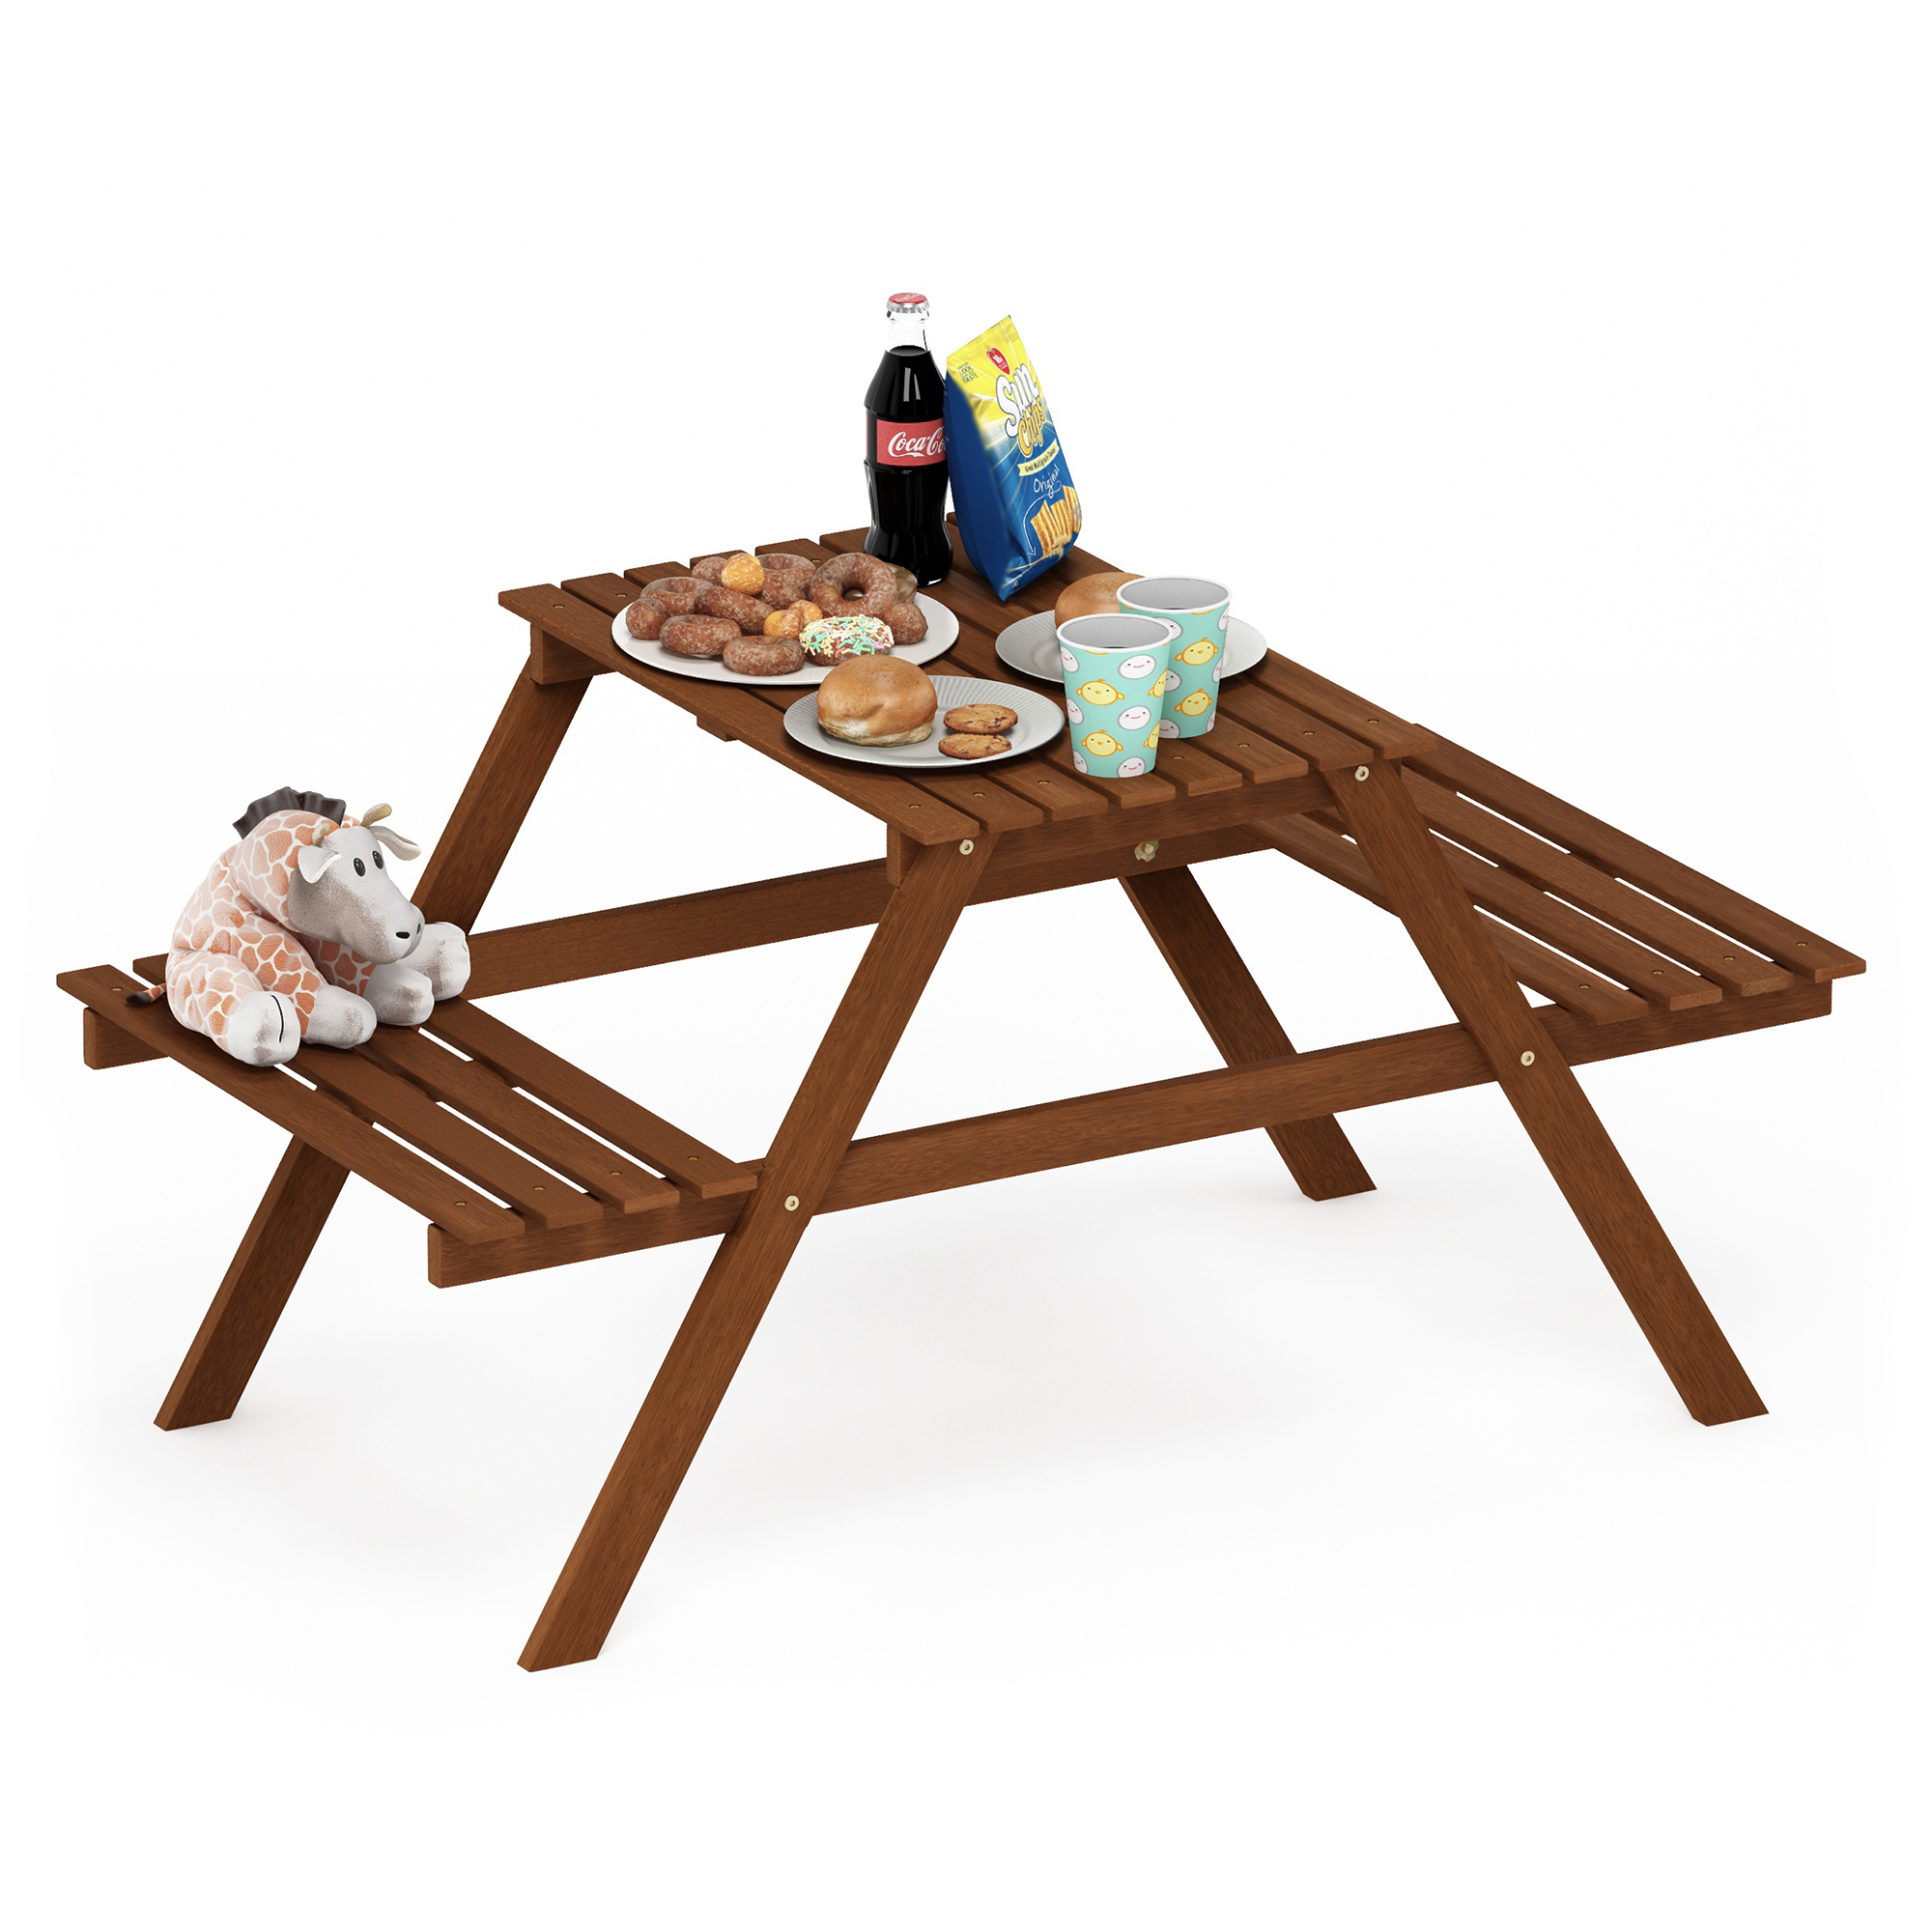 Furinno Tioman Hardwood Kids Picnic Table and Chair Set in Teak Oil - image 2 of 6